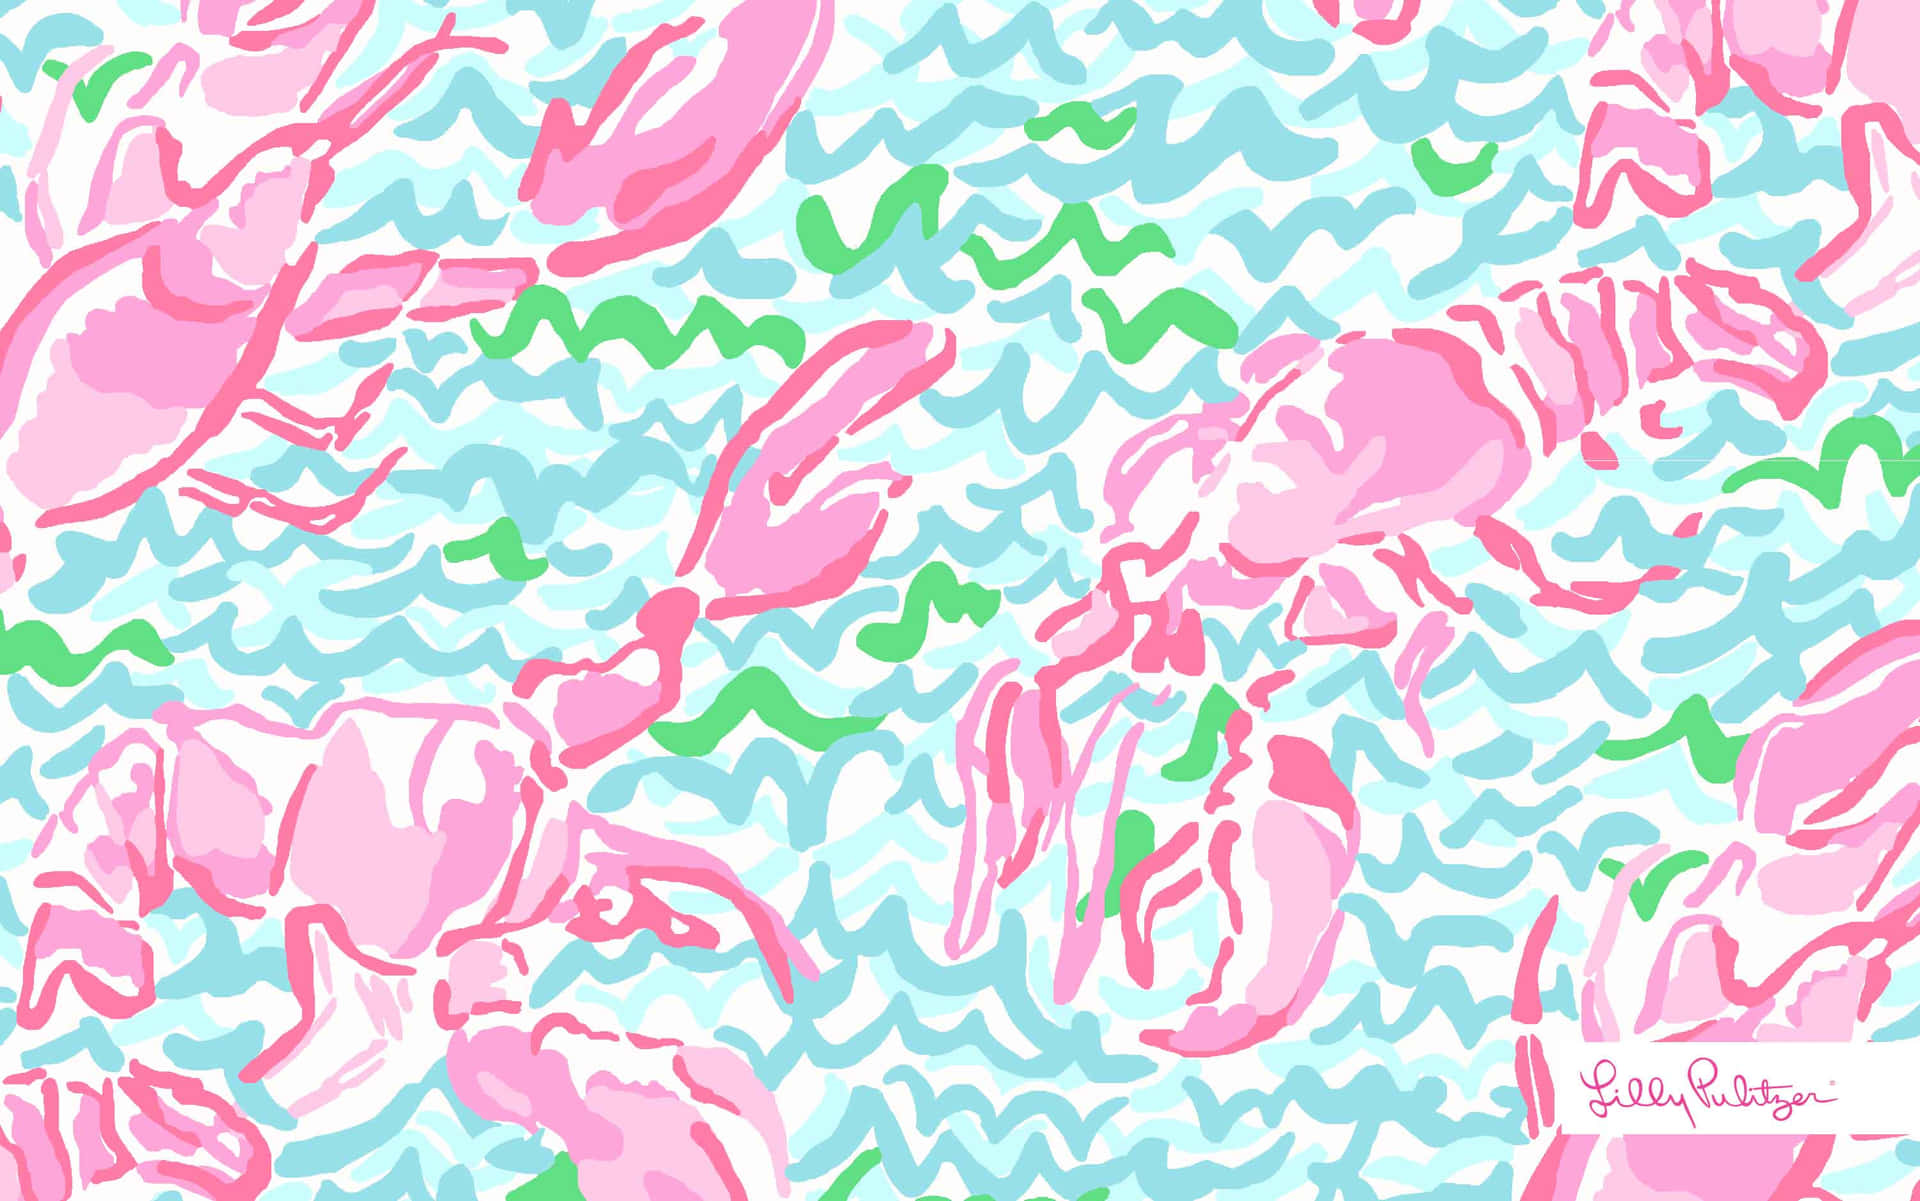 Stand Out in Style with Lilly Pulitzer